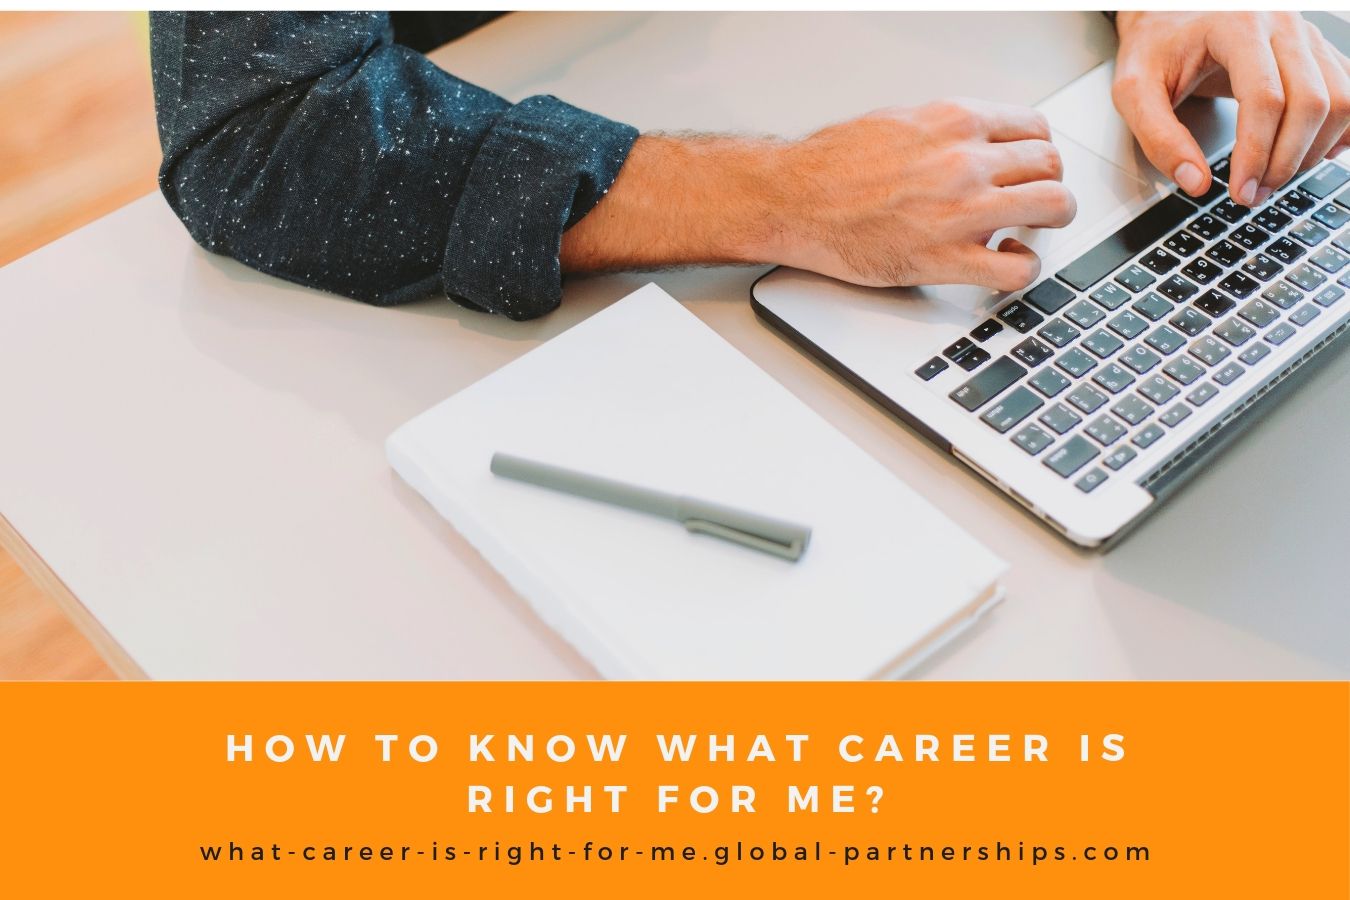 What career is right for me